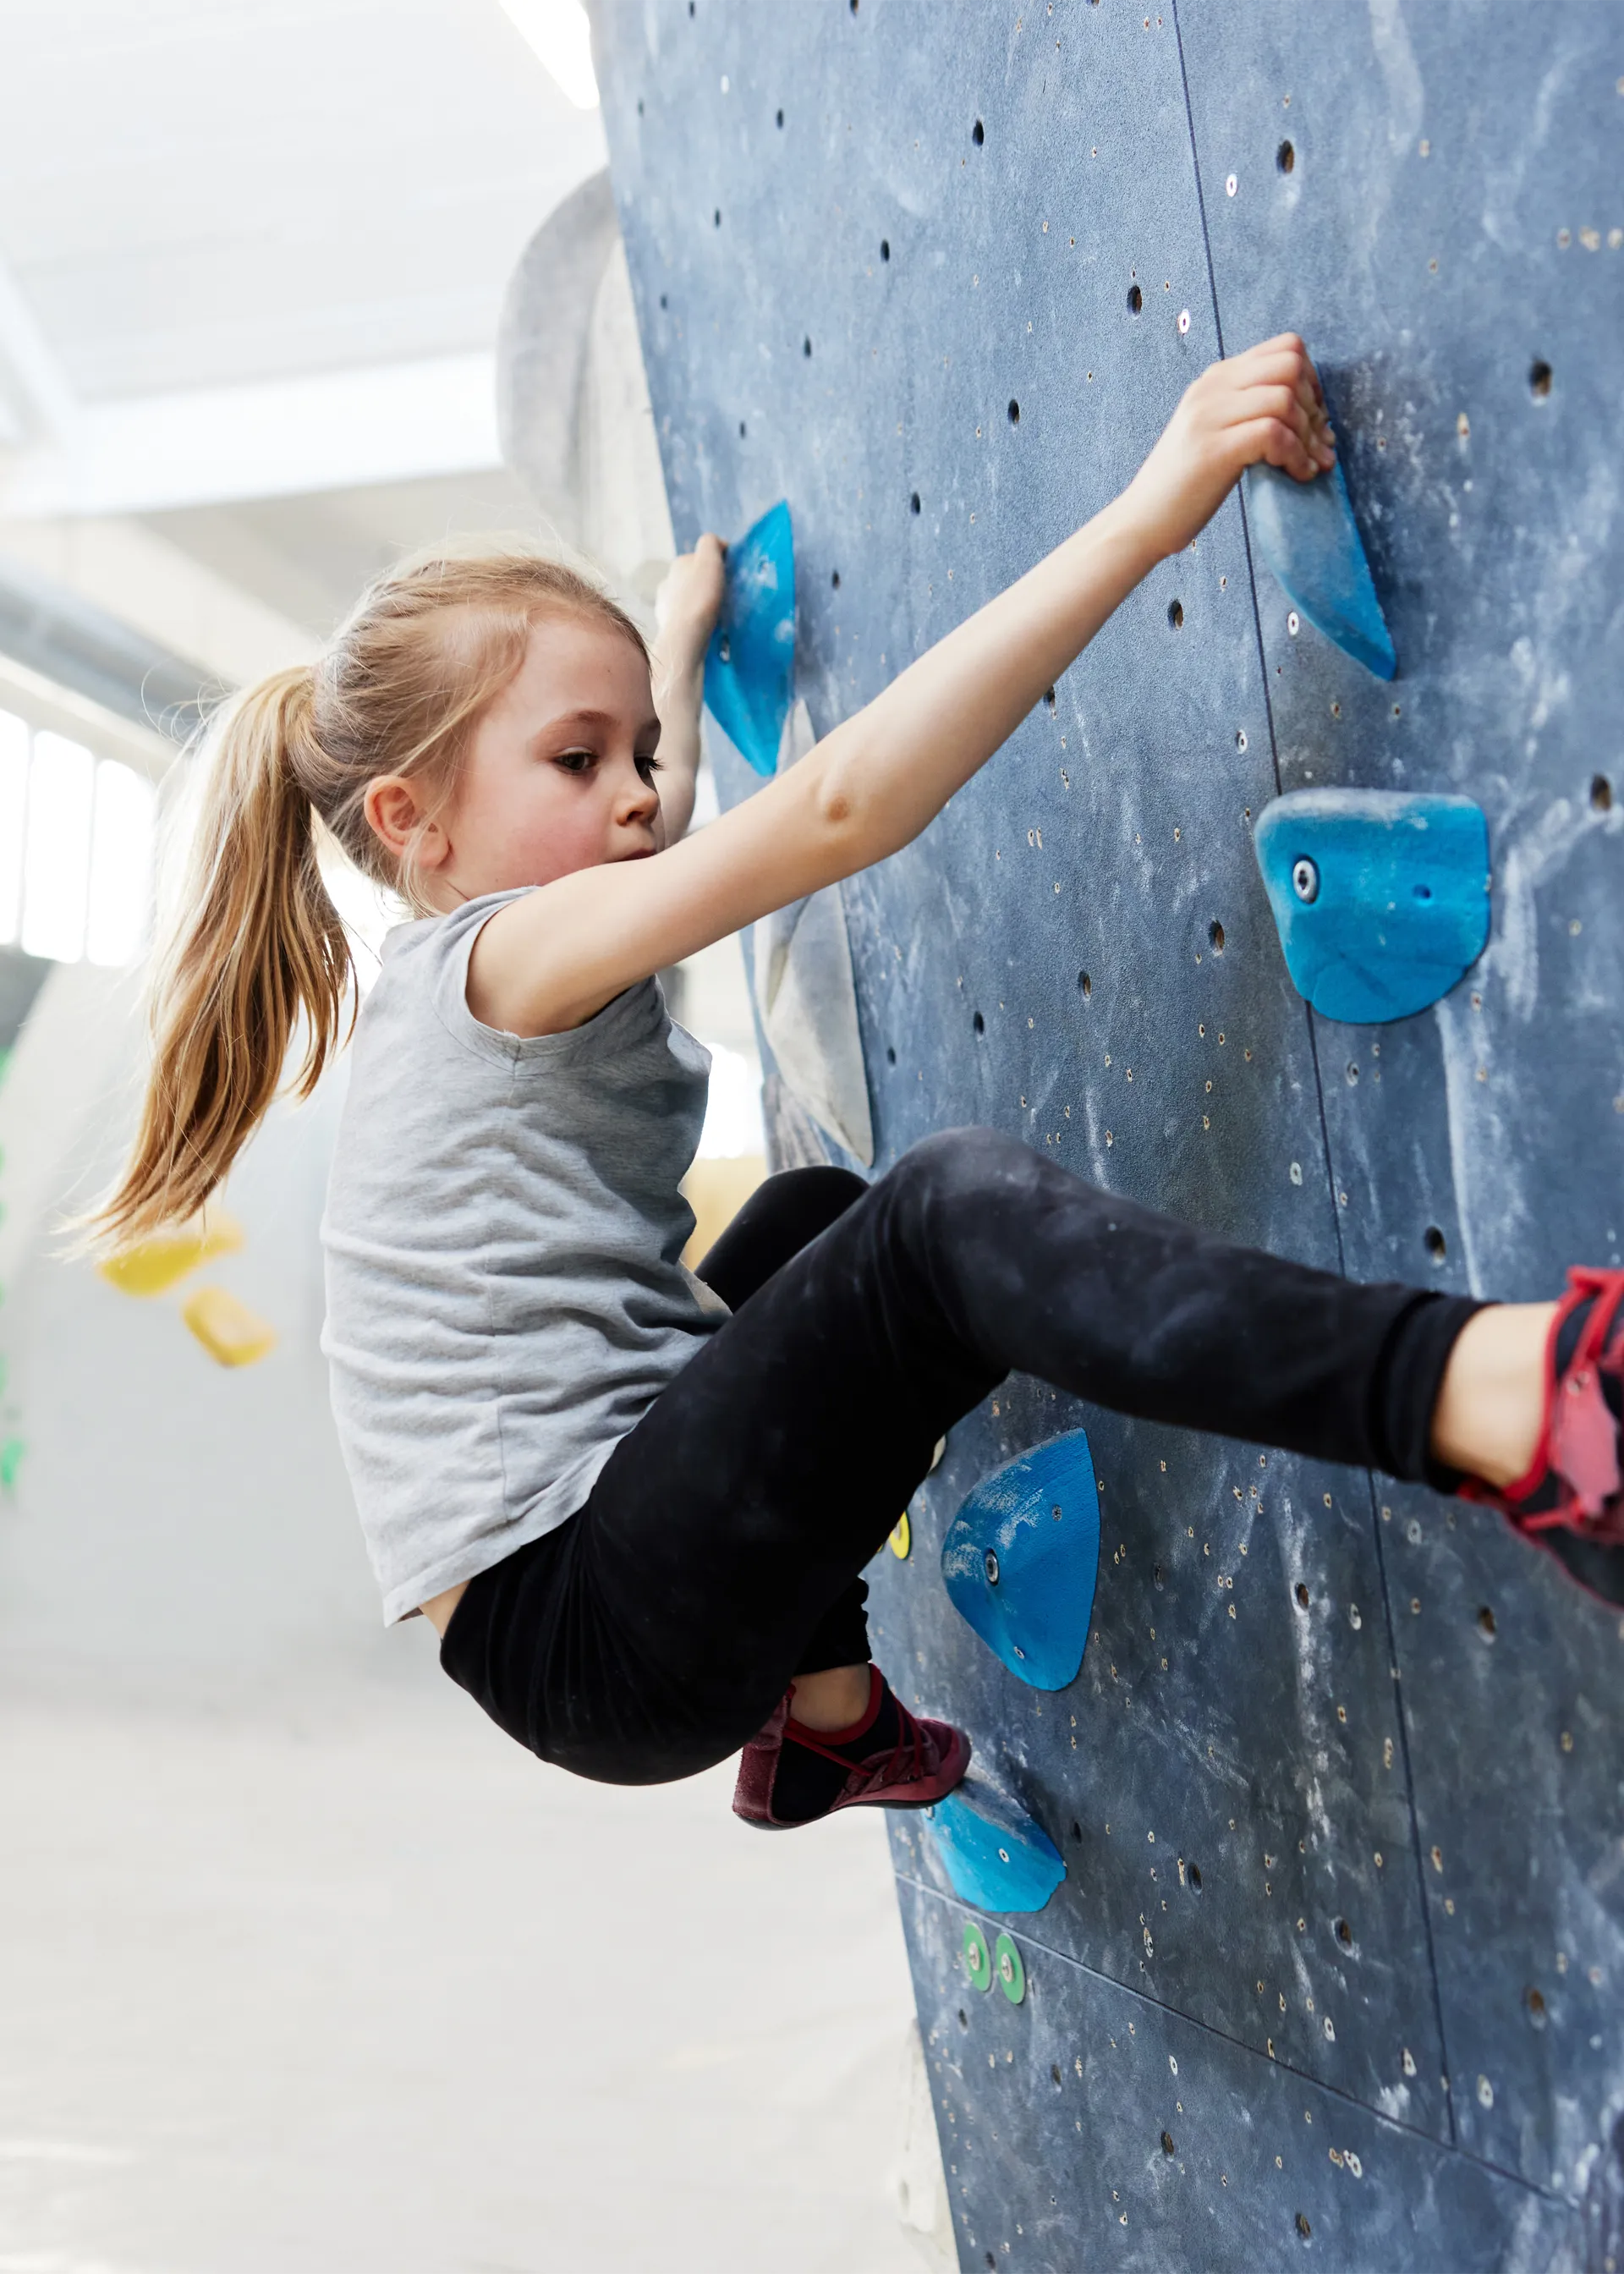 A close-up of a child climbing on an indoor rock wall.